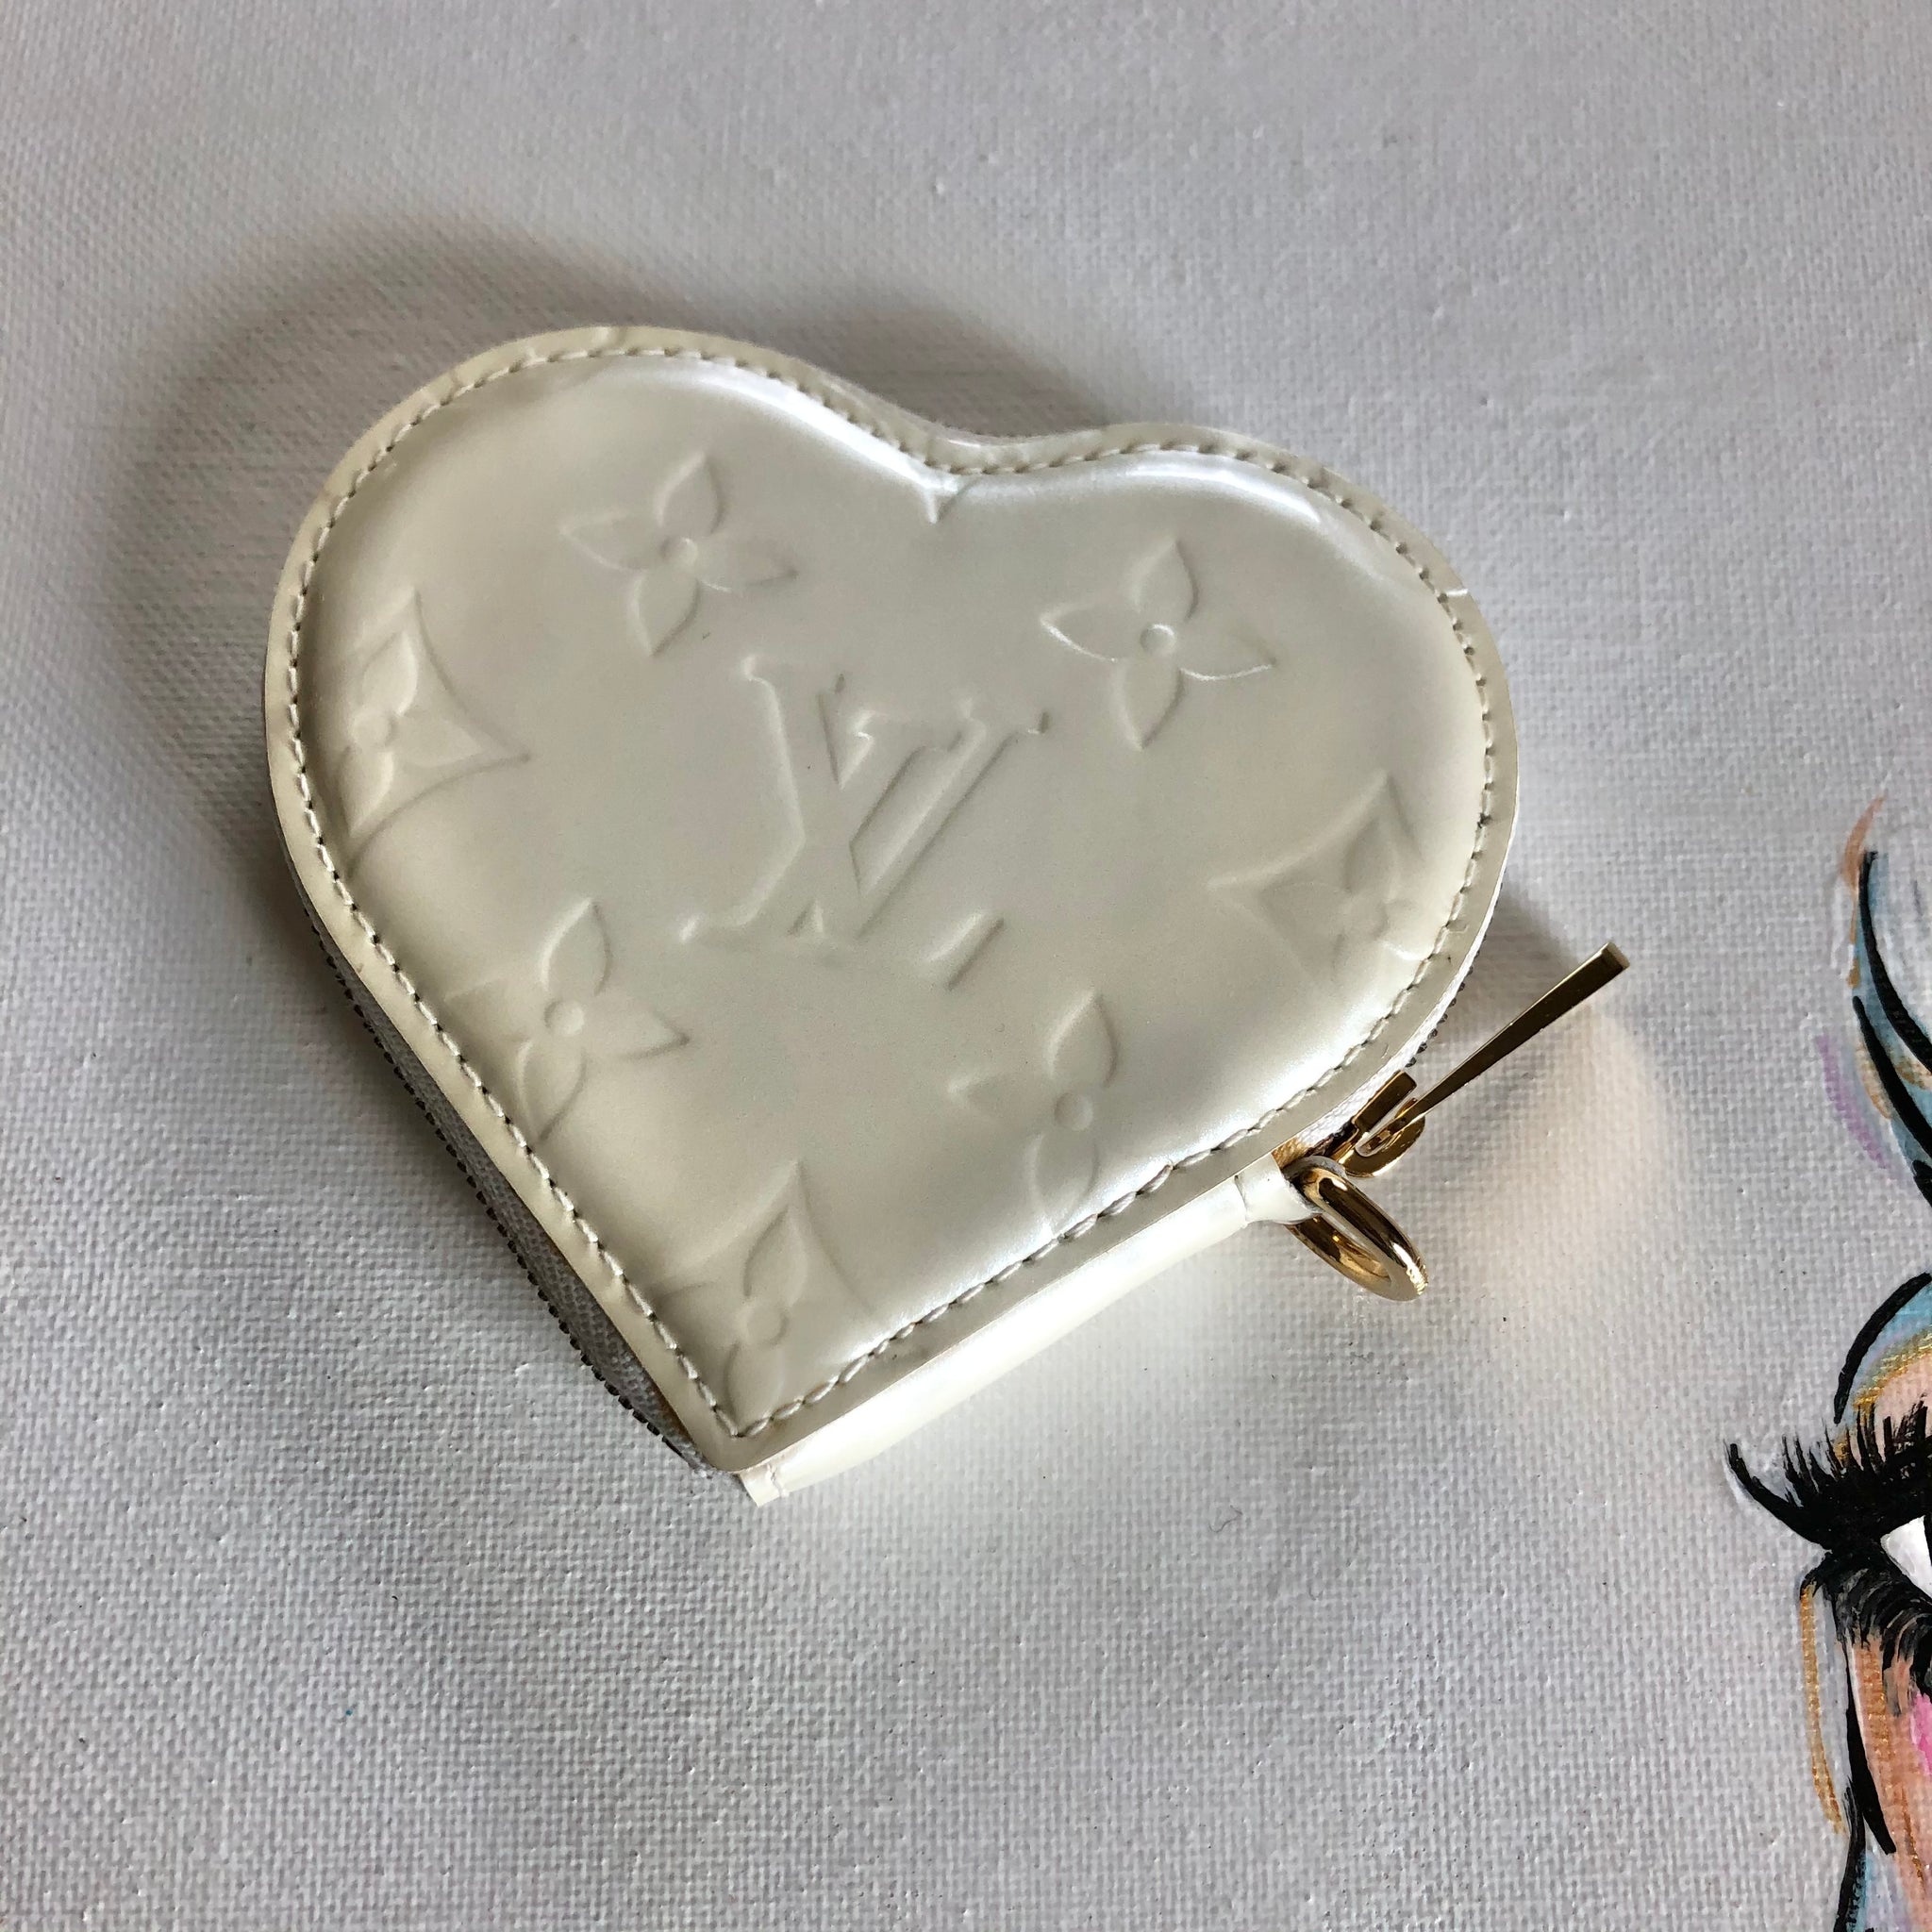 Louis Vuitton Heart Coin Purse - 2 For Sale on 1stDibs  louis vuitton  heart wallet, louis vuitton coin purse heart, louis vuitton heart shaped coin  purse